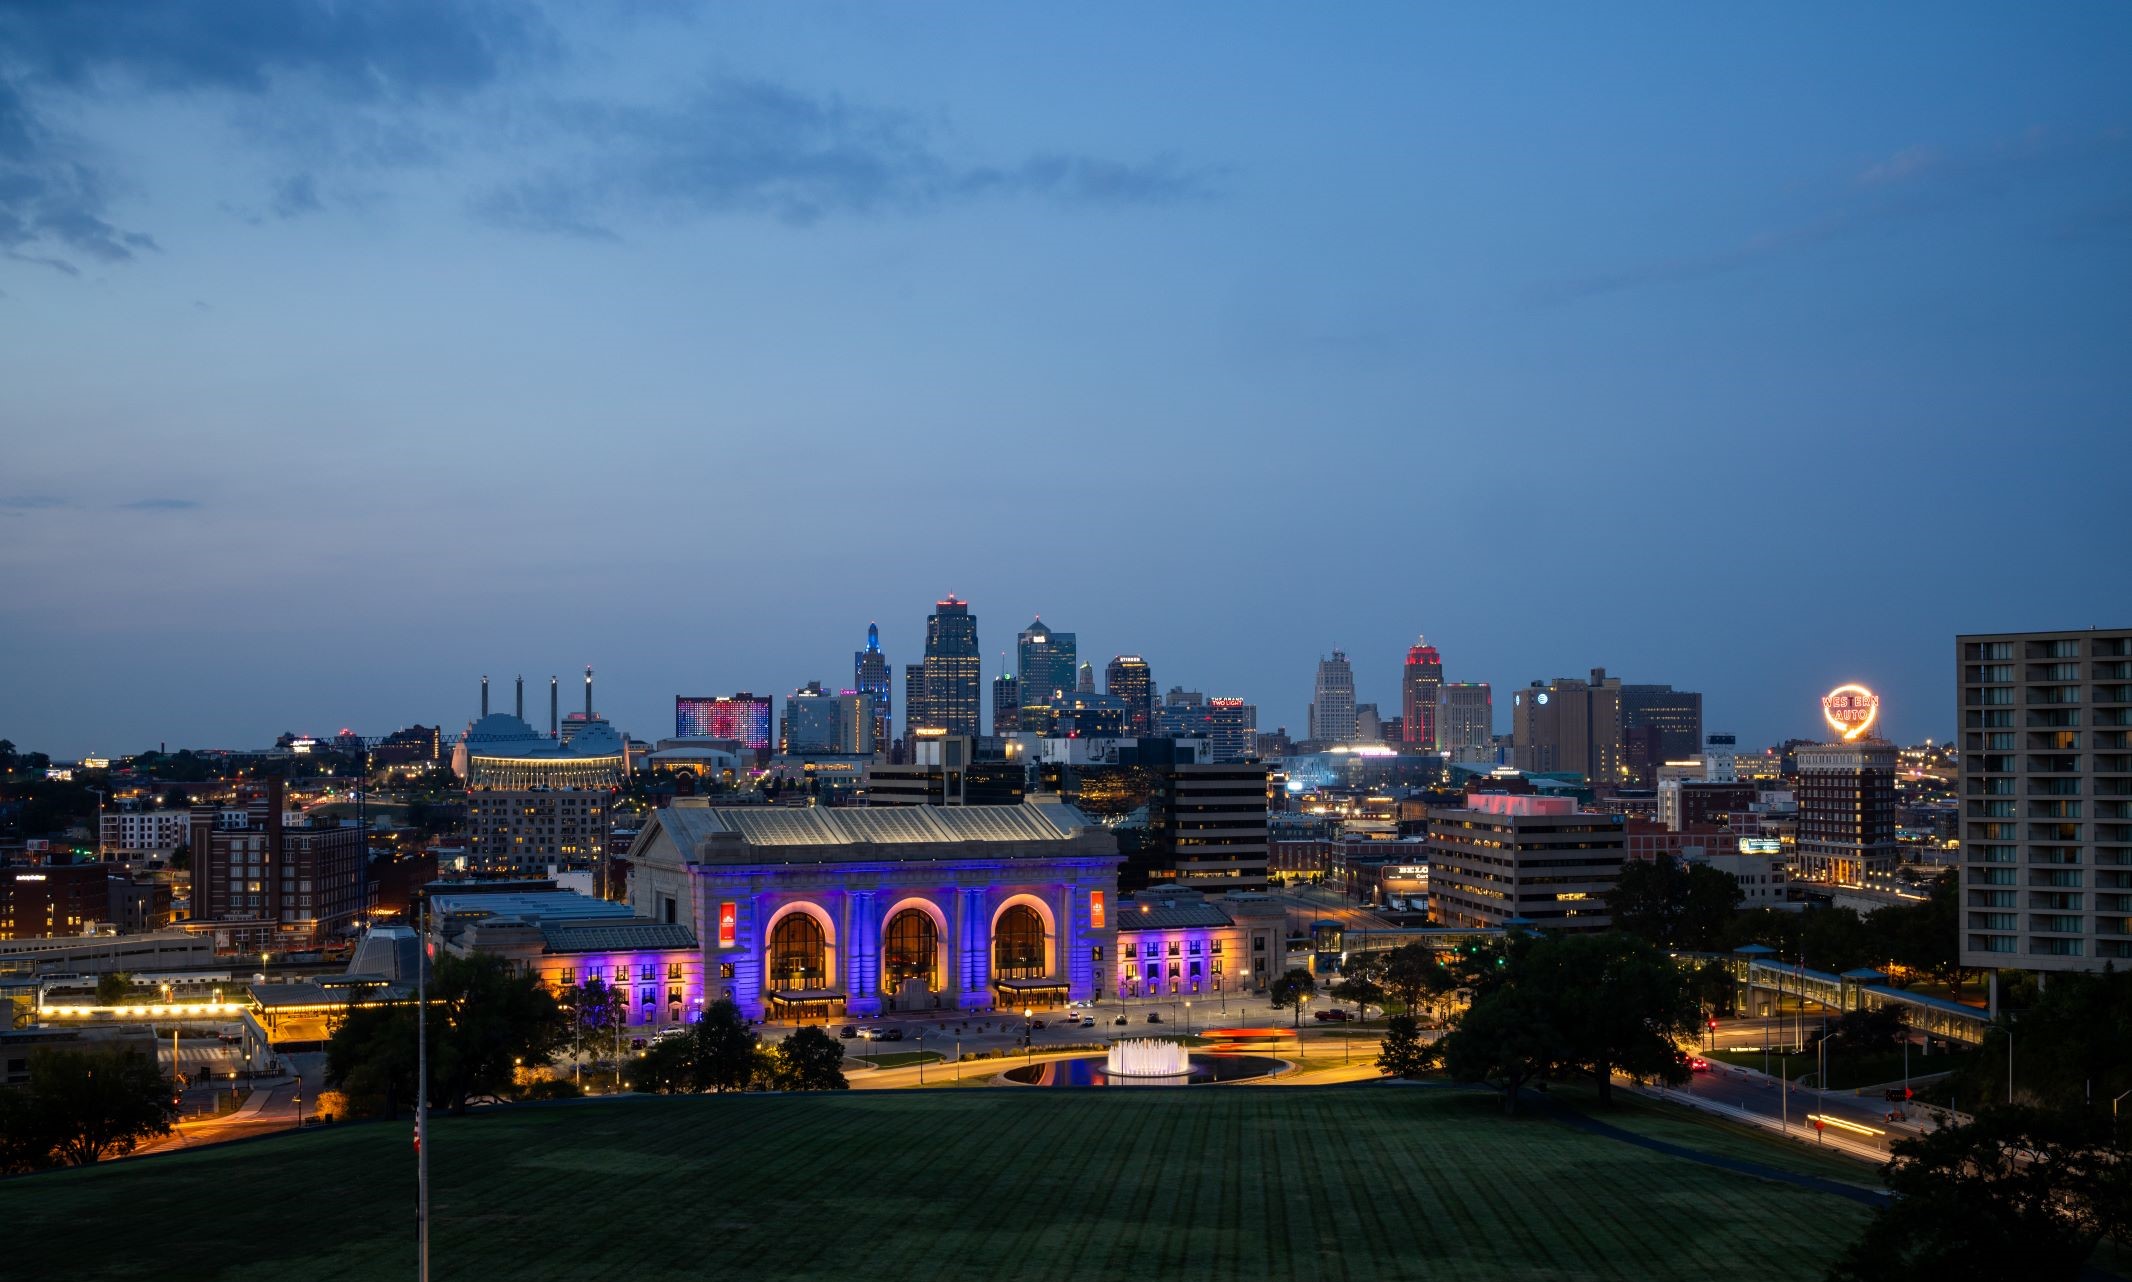 Sunset photo overviewing Kansas City and Union station being lit up in blue and gold